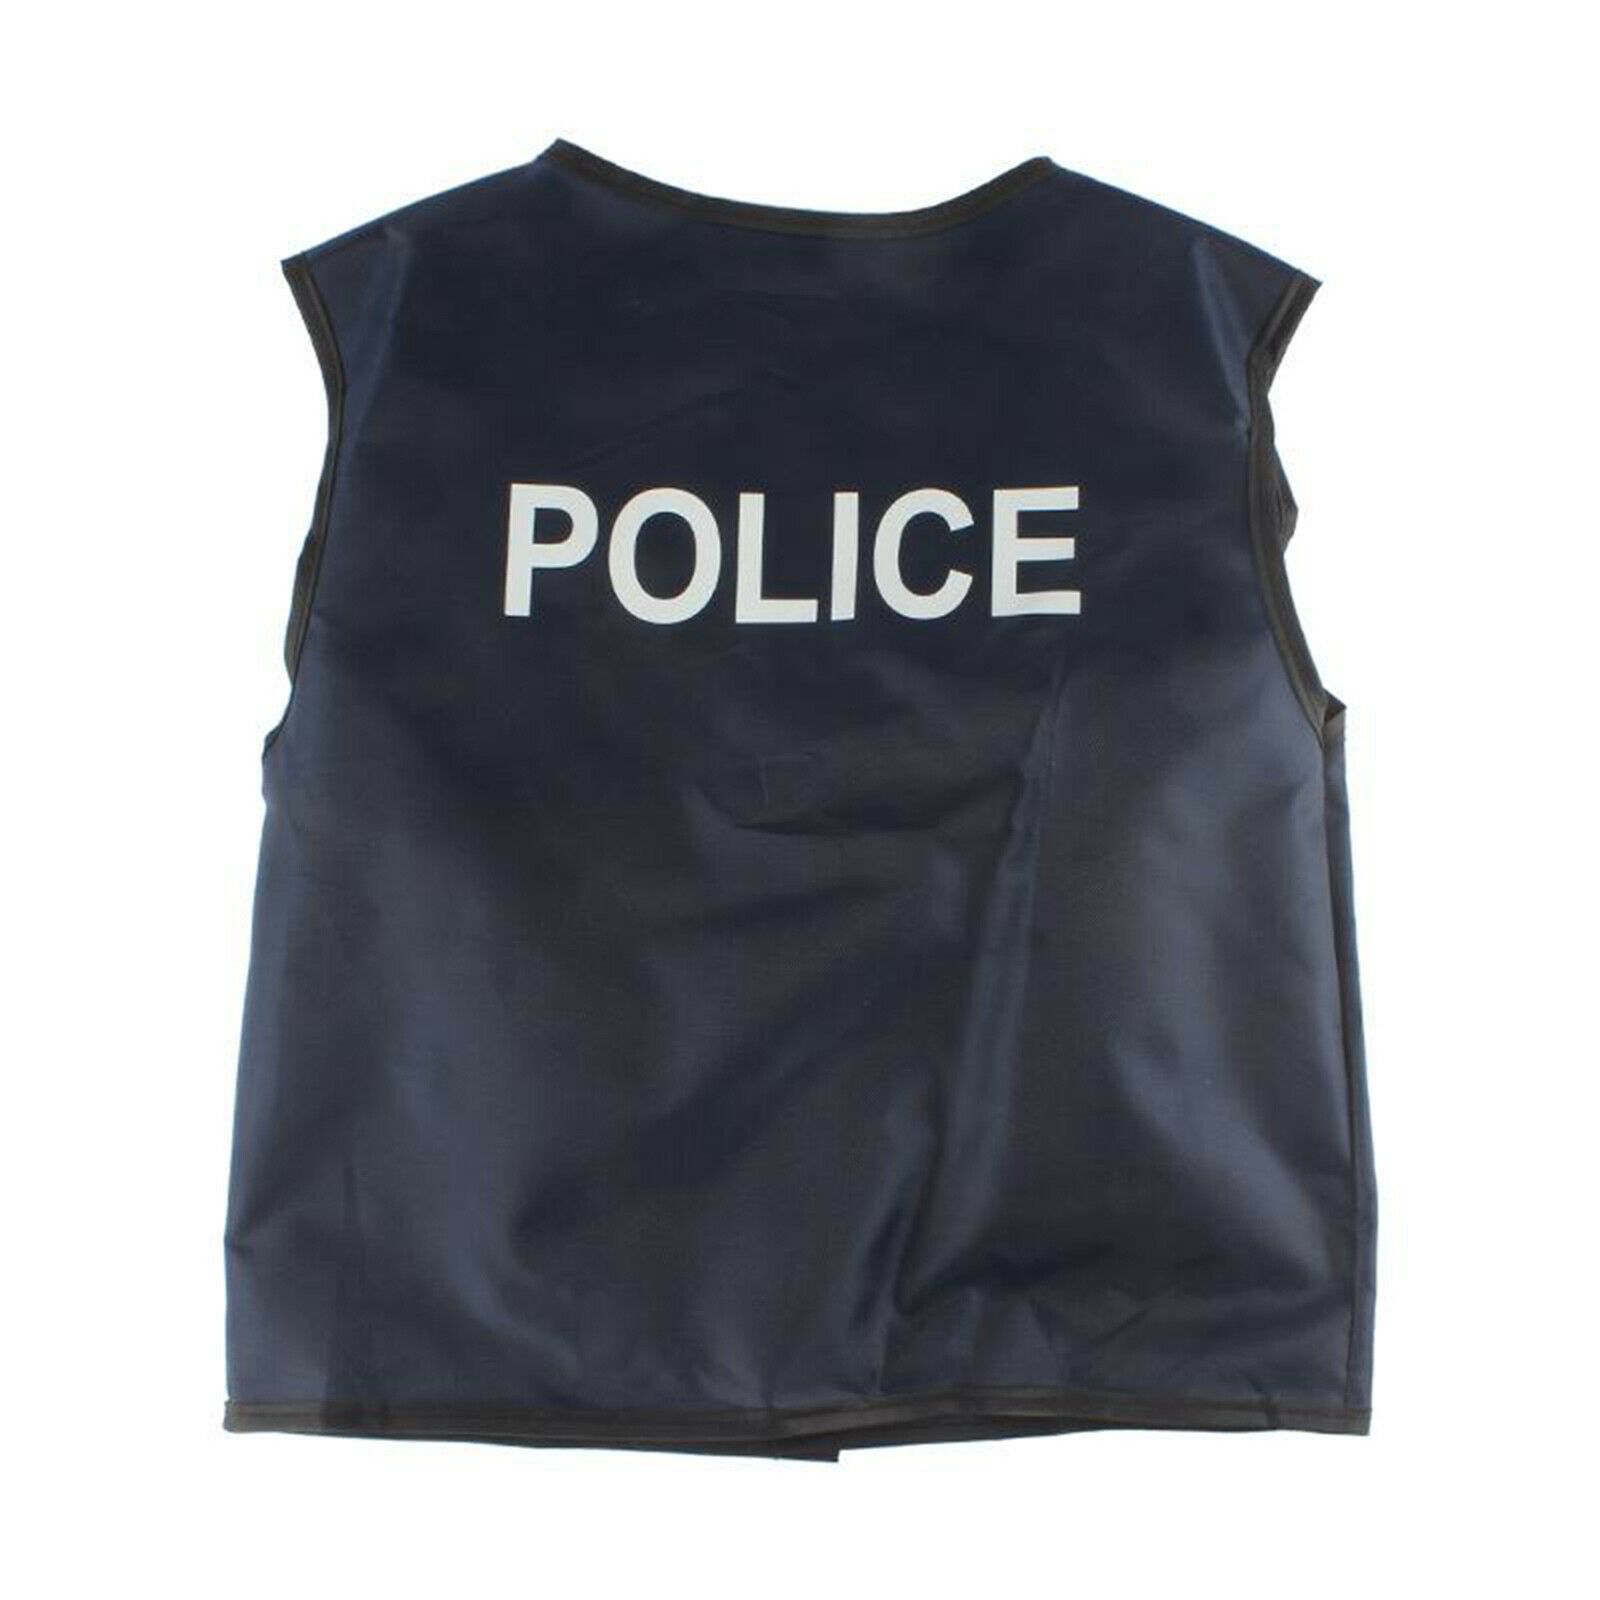 4x Toddlers Dress up Policeman Vest Costume for Pretend Play Party Supplies